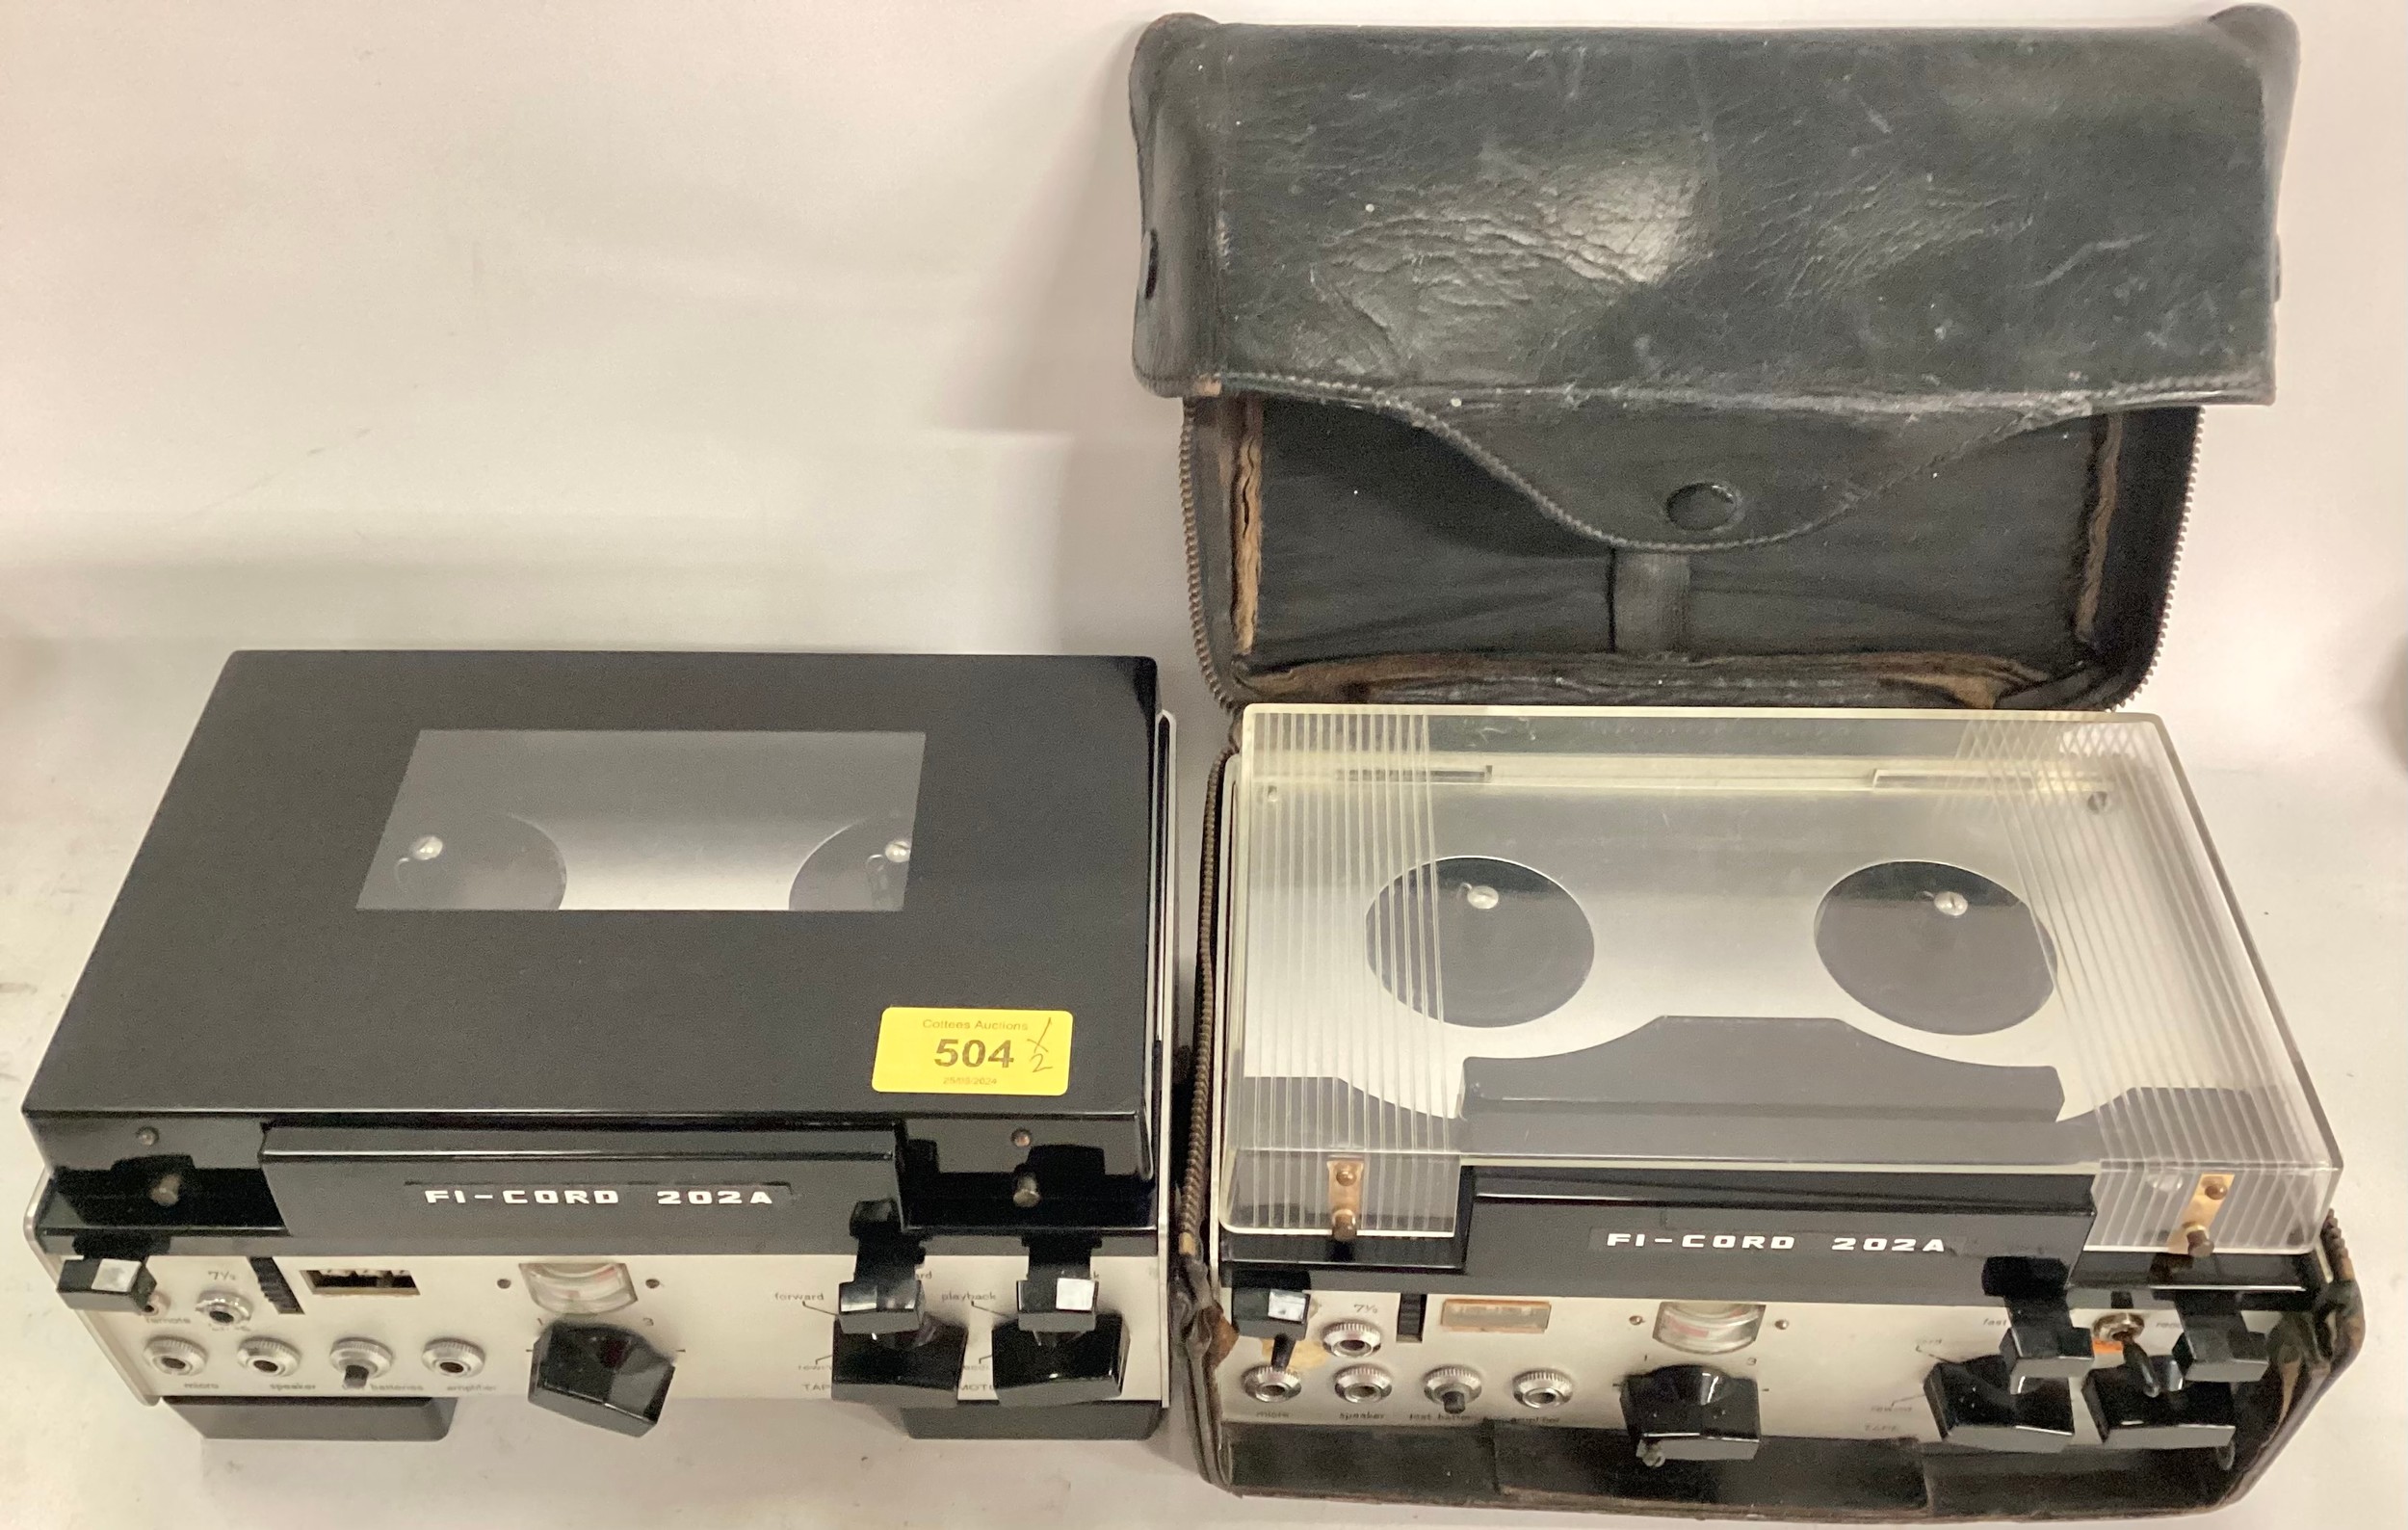 FI-CORD PORTABLE REEL TO REEL TAPE RECORDERS. Here we have 2 tape recorders model No. 202A. One